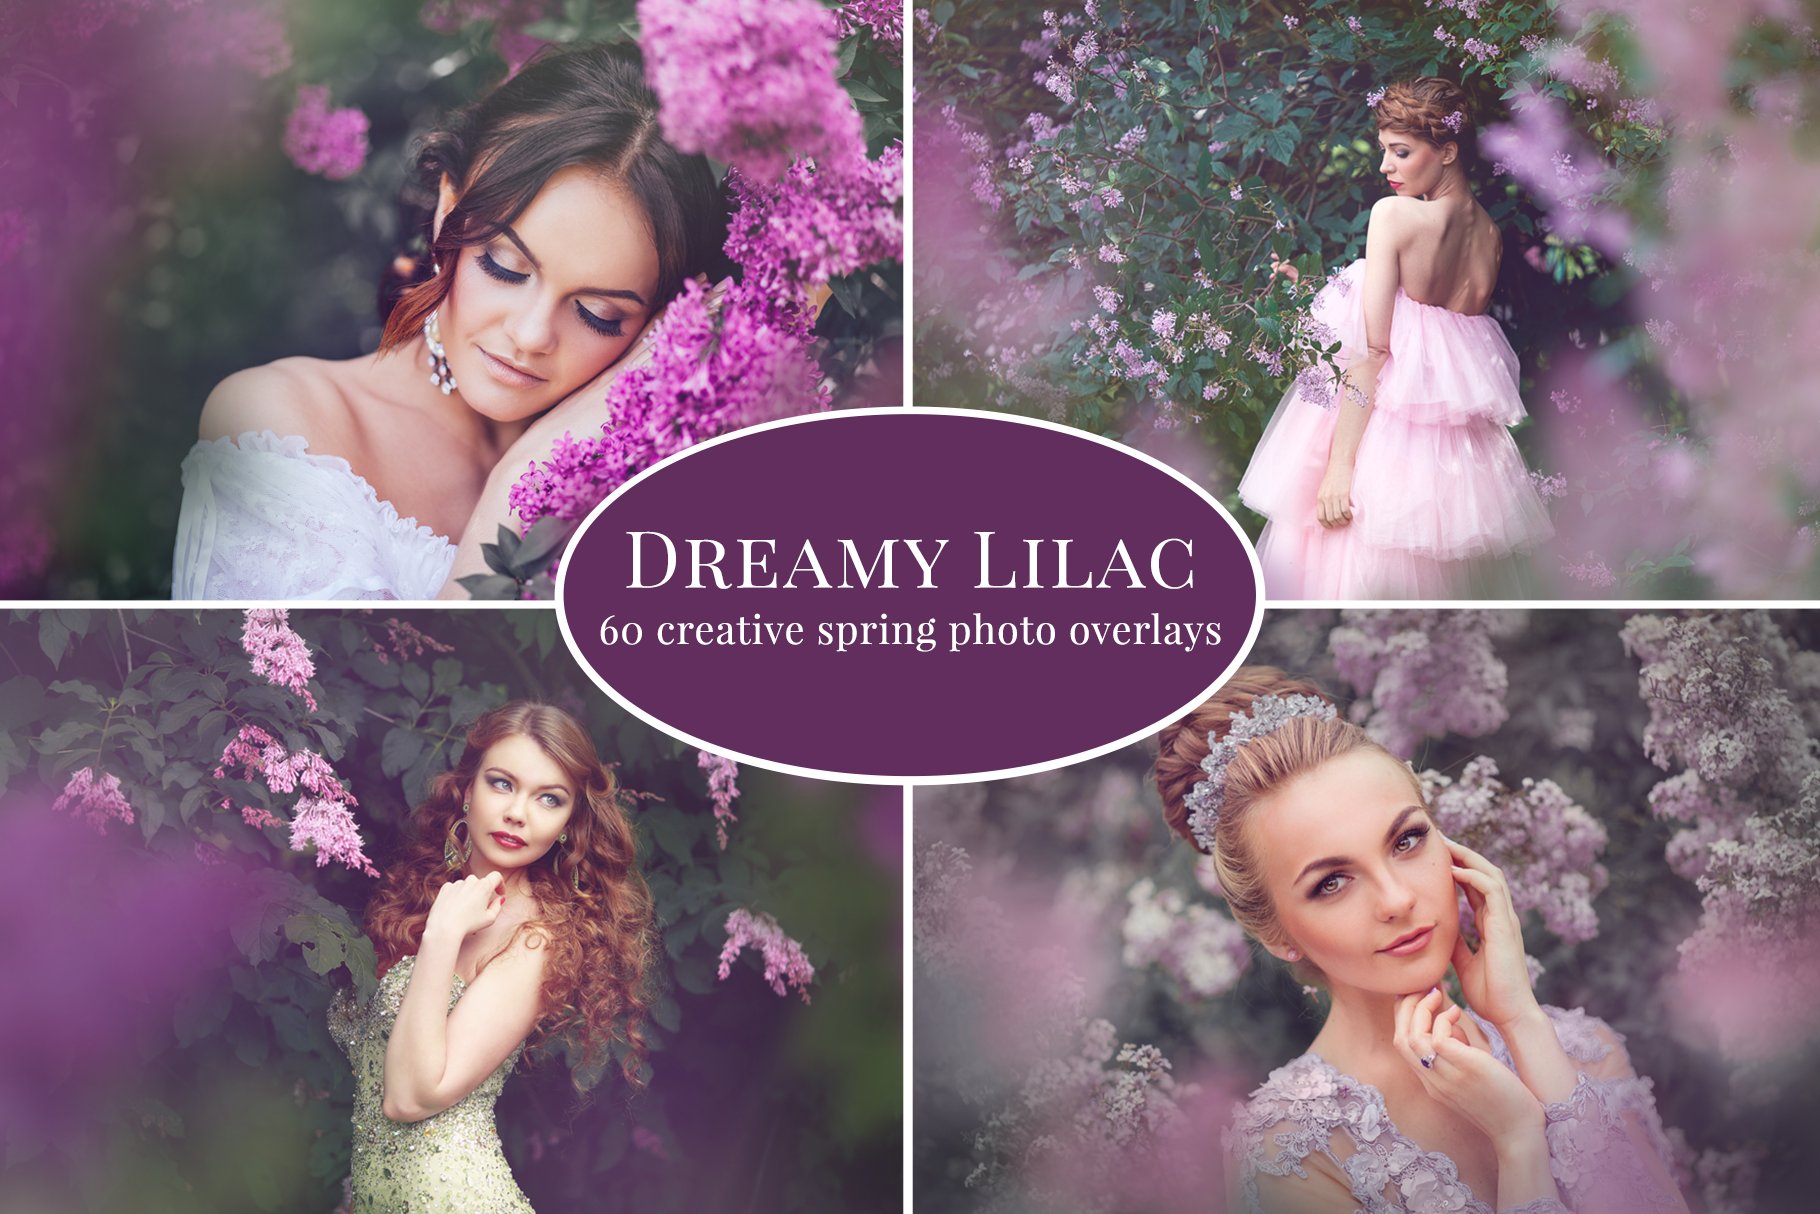 Dreamy Lilac photo overlayscover image.